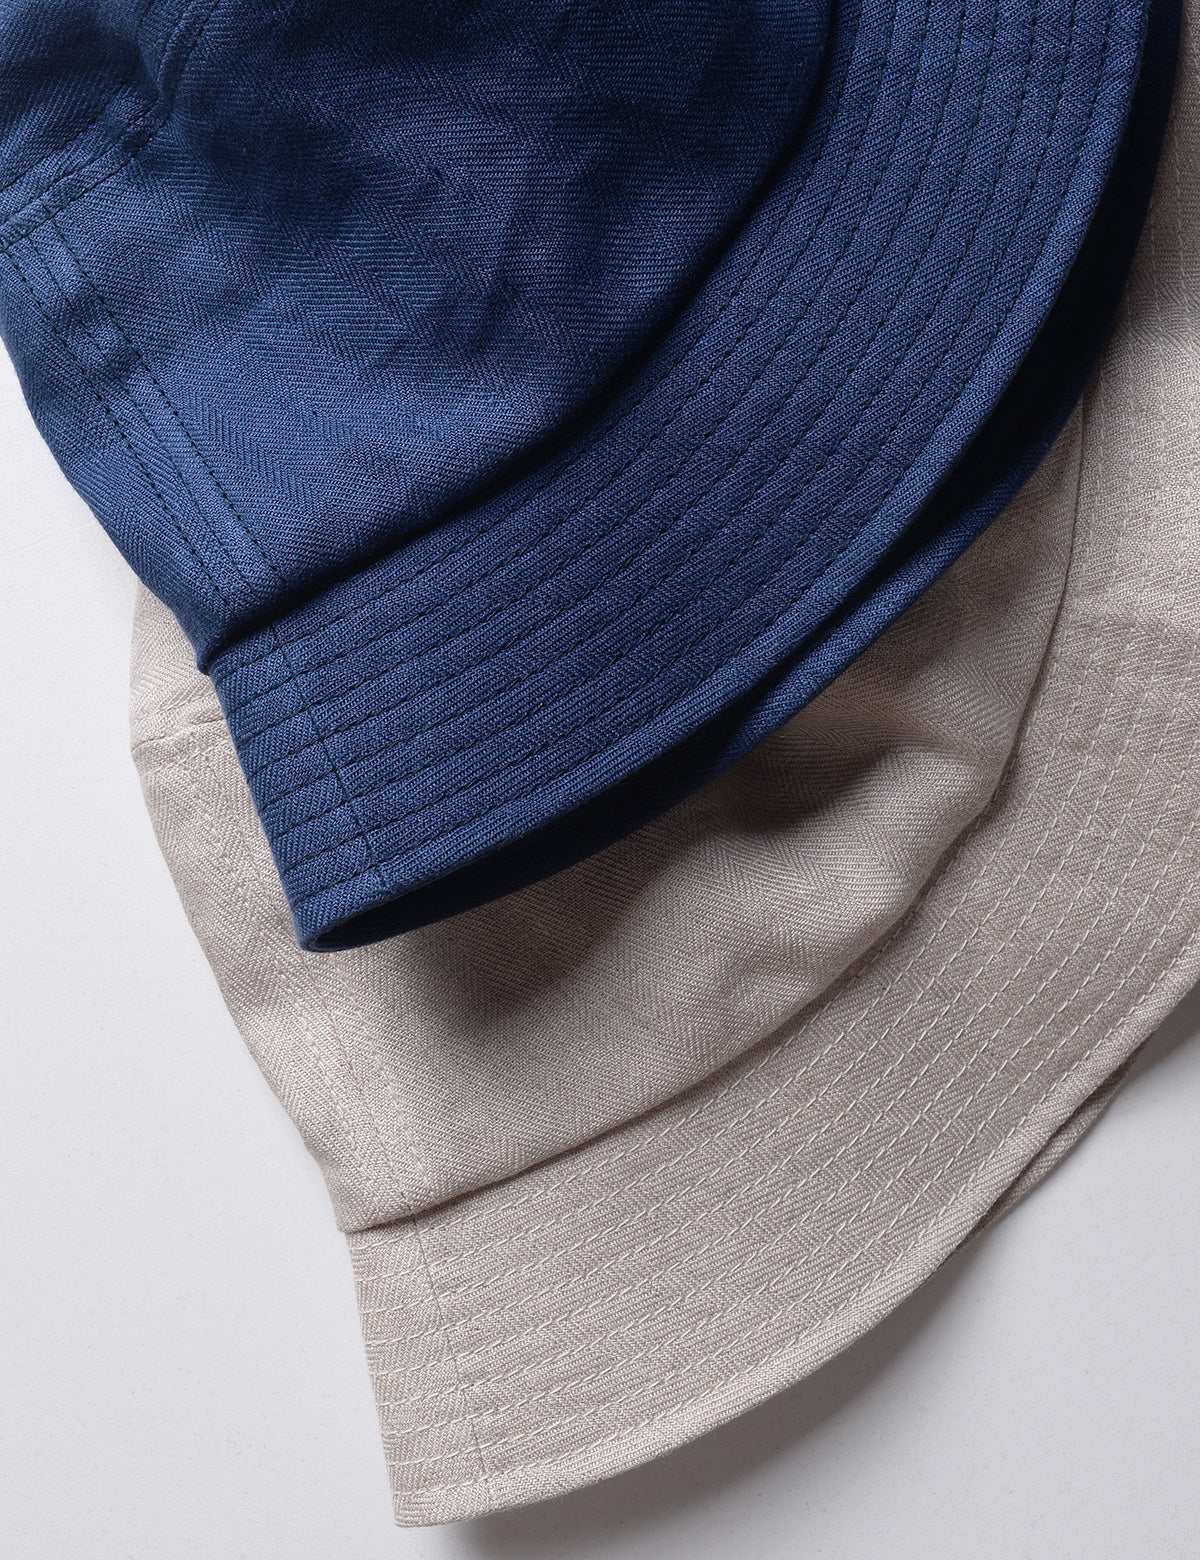 Detail shot of two colors of French Linen Bucket Hat  to show fabric weave